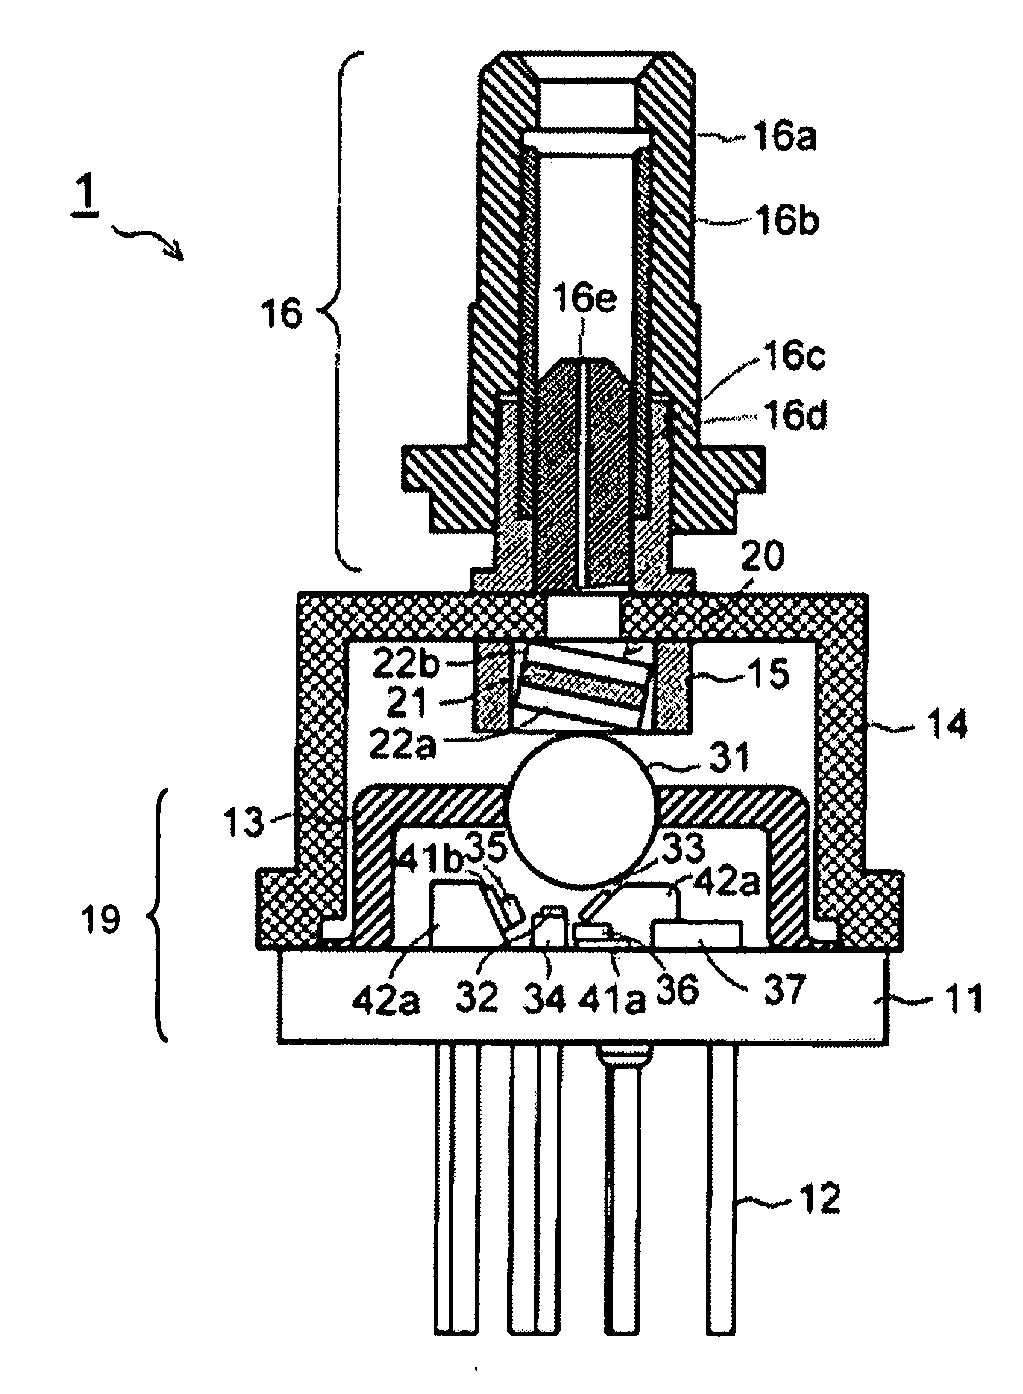 Bi-directional optical module with a polarization independent optical isolator